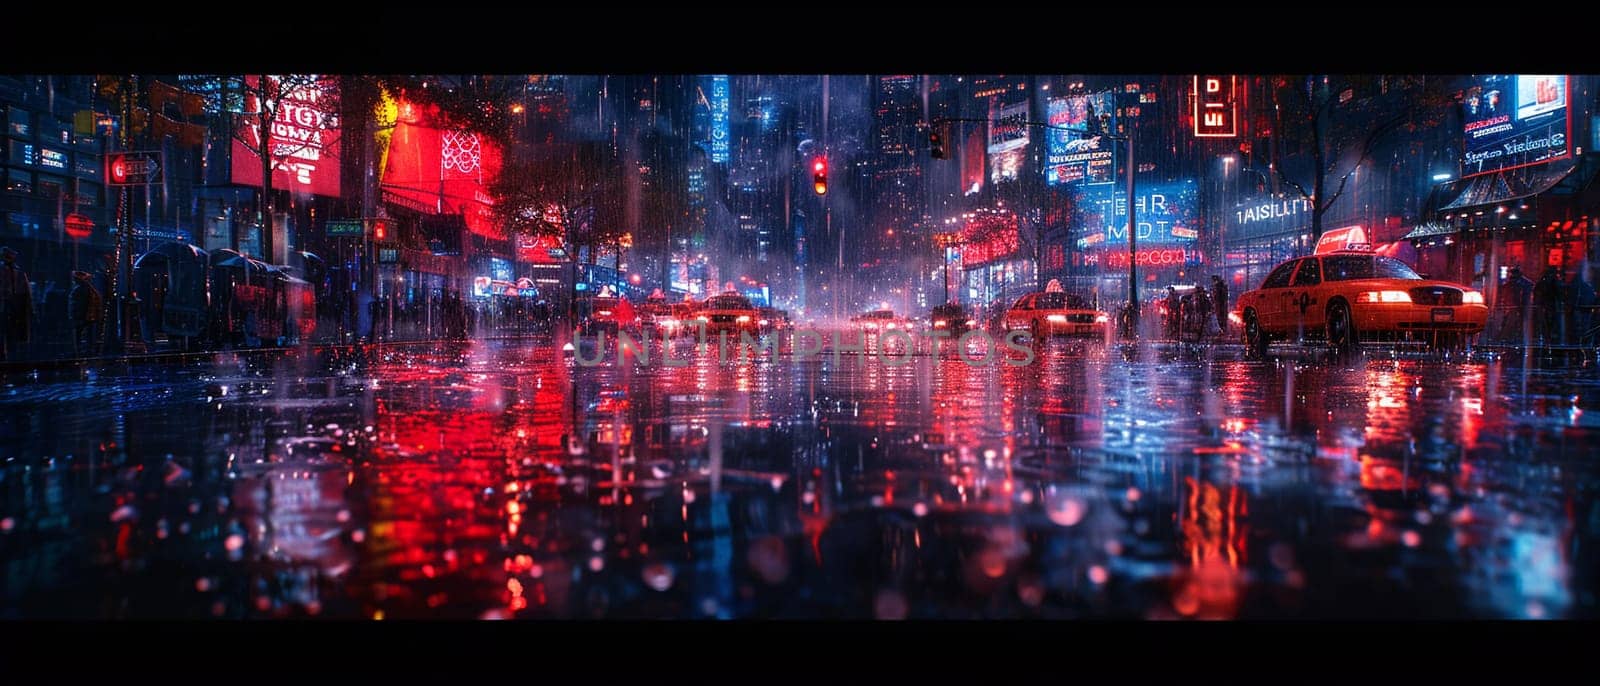 Rain falling on a city street at night by Benzoix